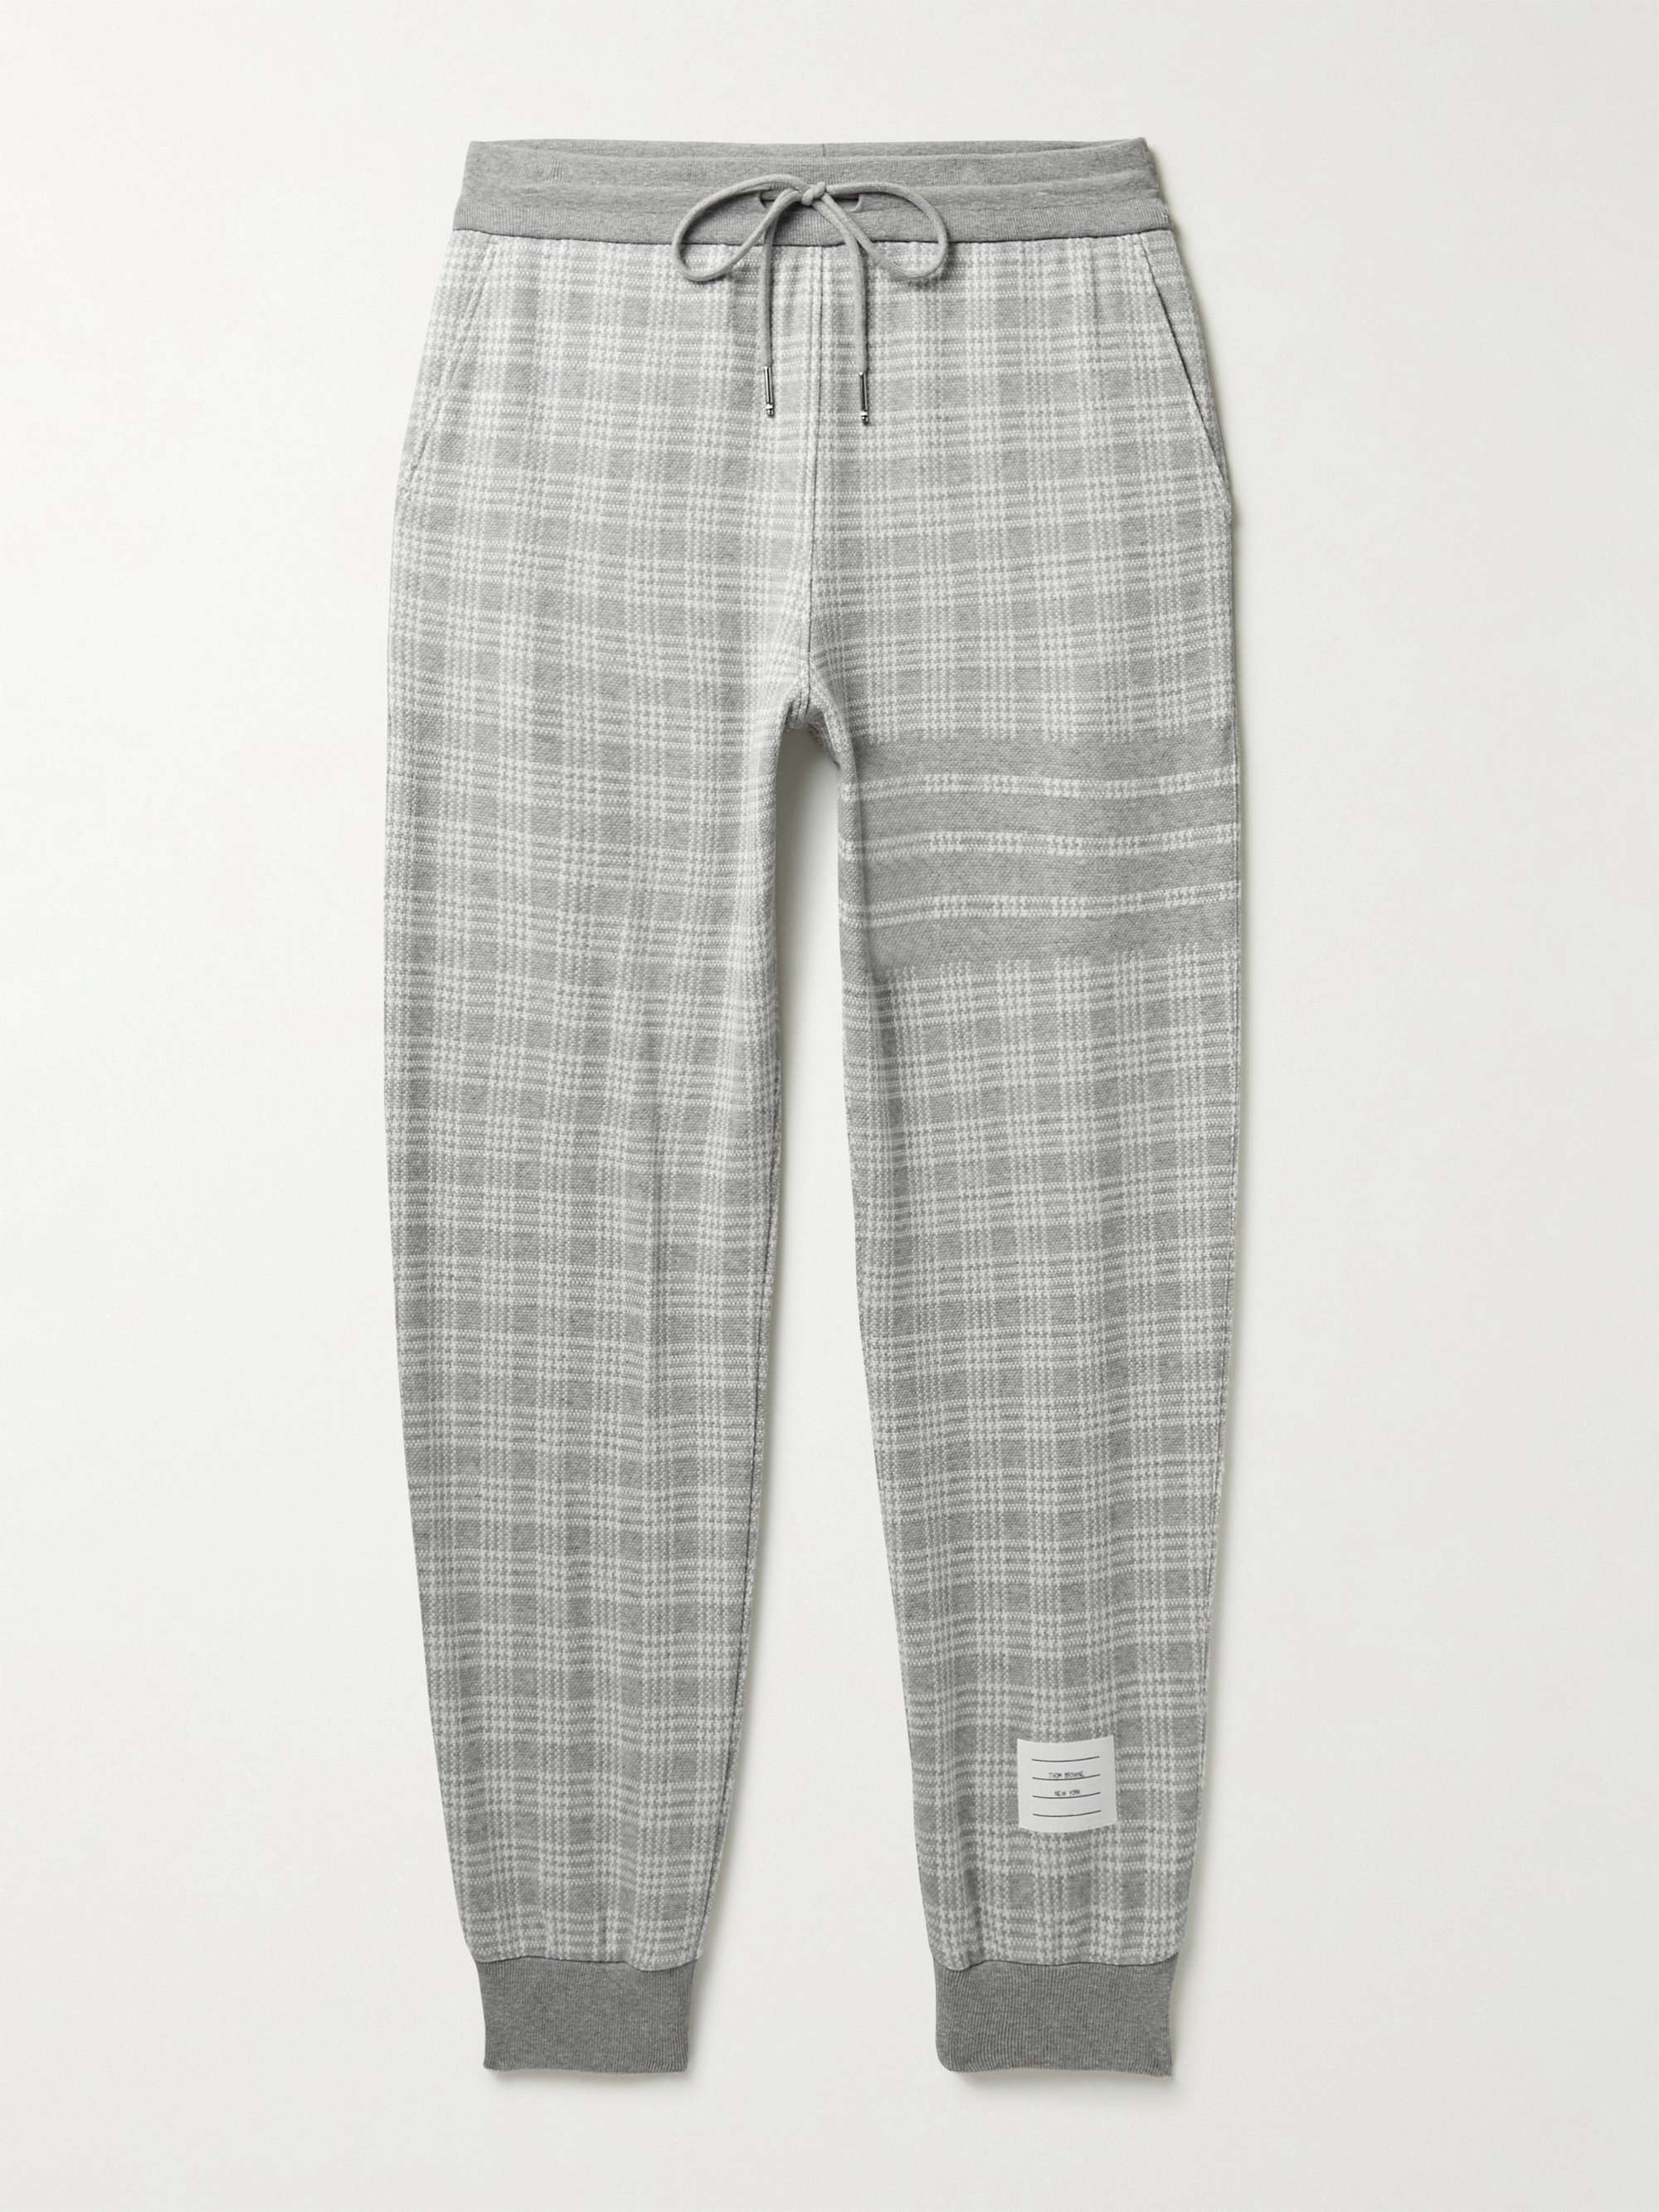 THOM BROWNE Slim-Fit Tapered Prince of Wales Cotton Sweatpants